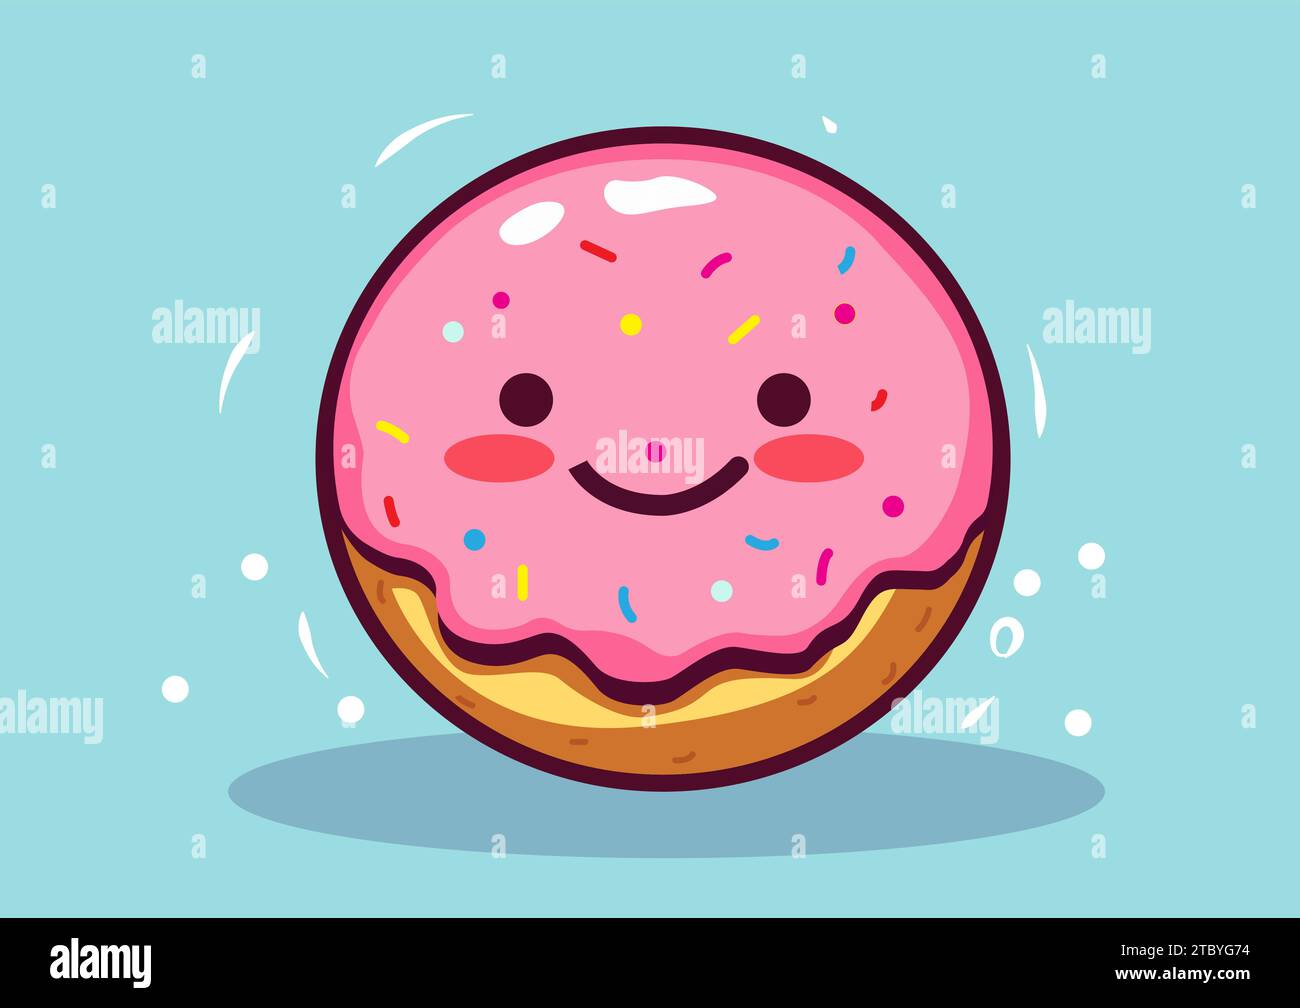 Pink donut with a bright smile decorated with multi-colored sugar flakes Vector donut art cartoon illustration used as a print template. Suitable for Stock Vector